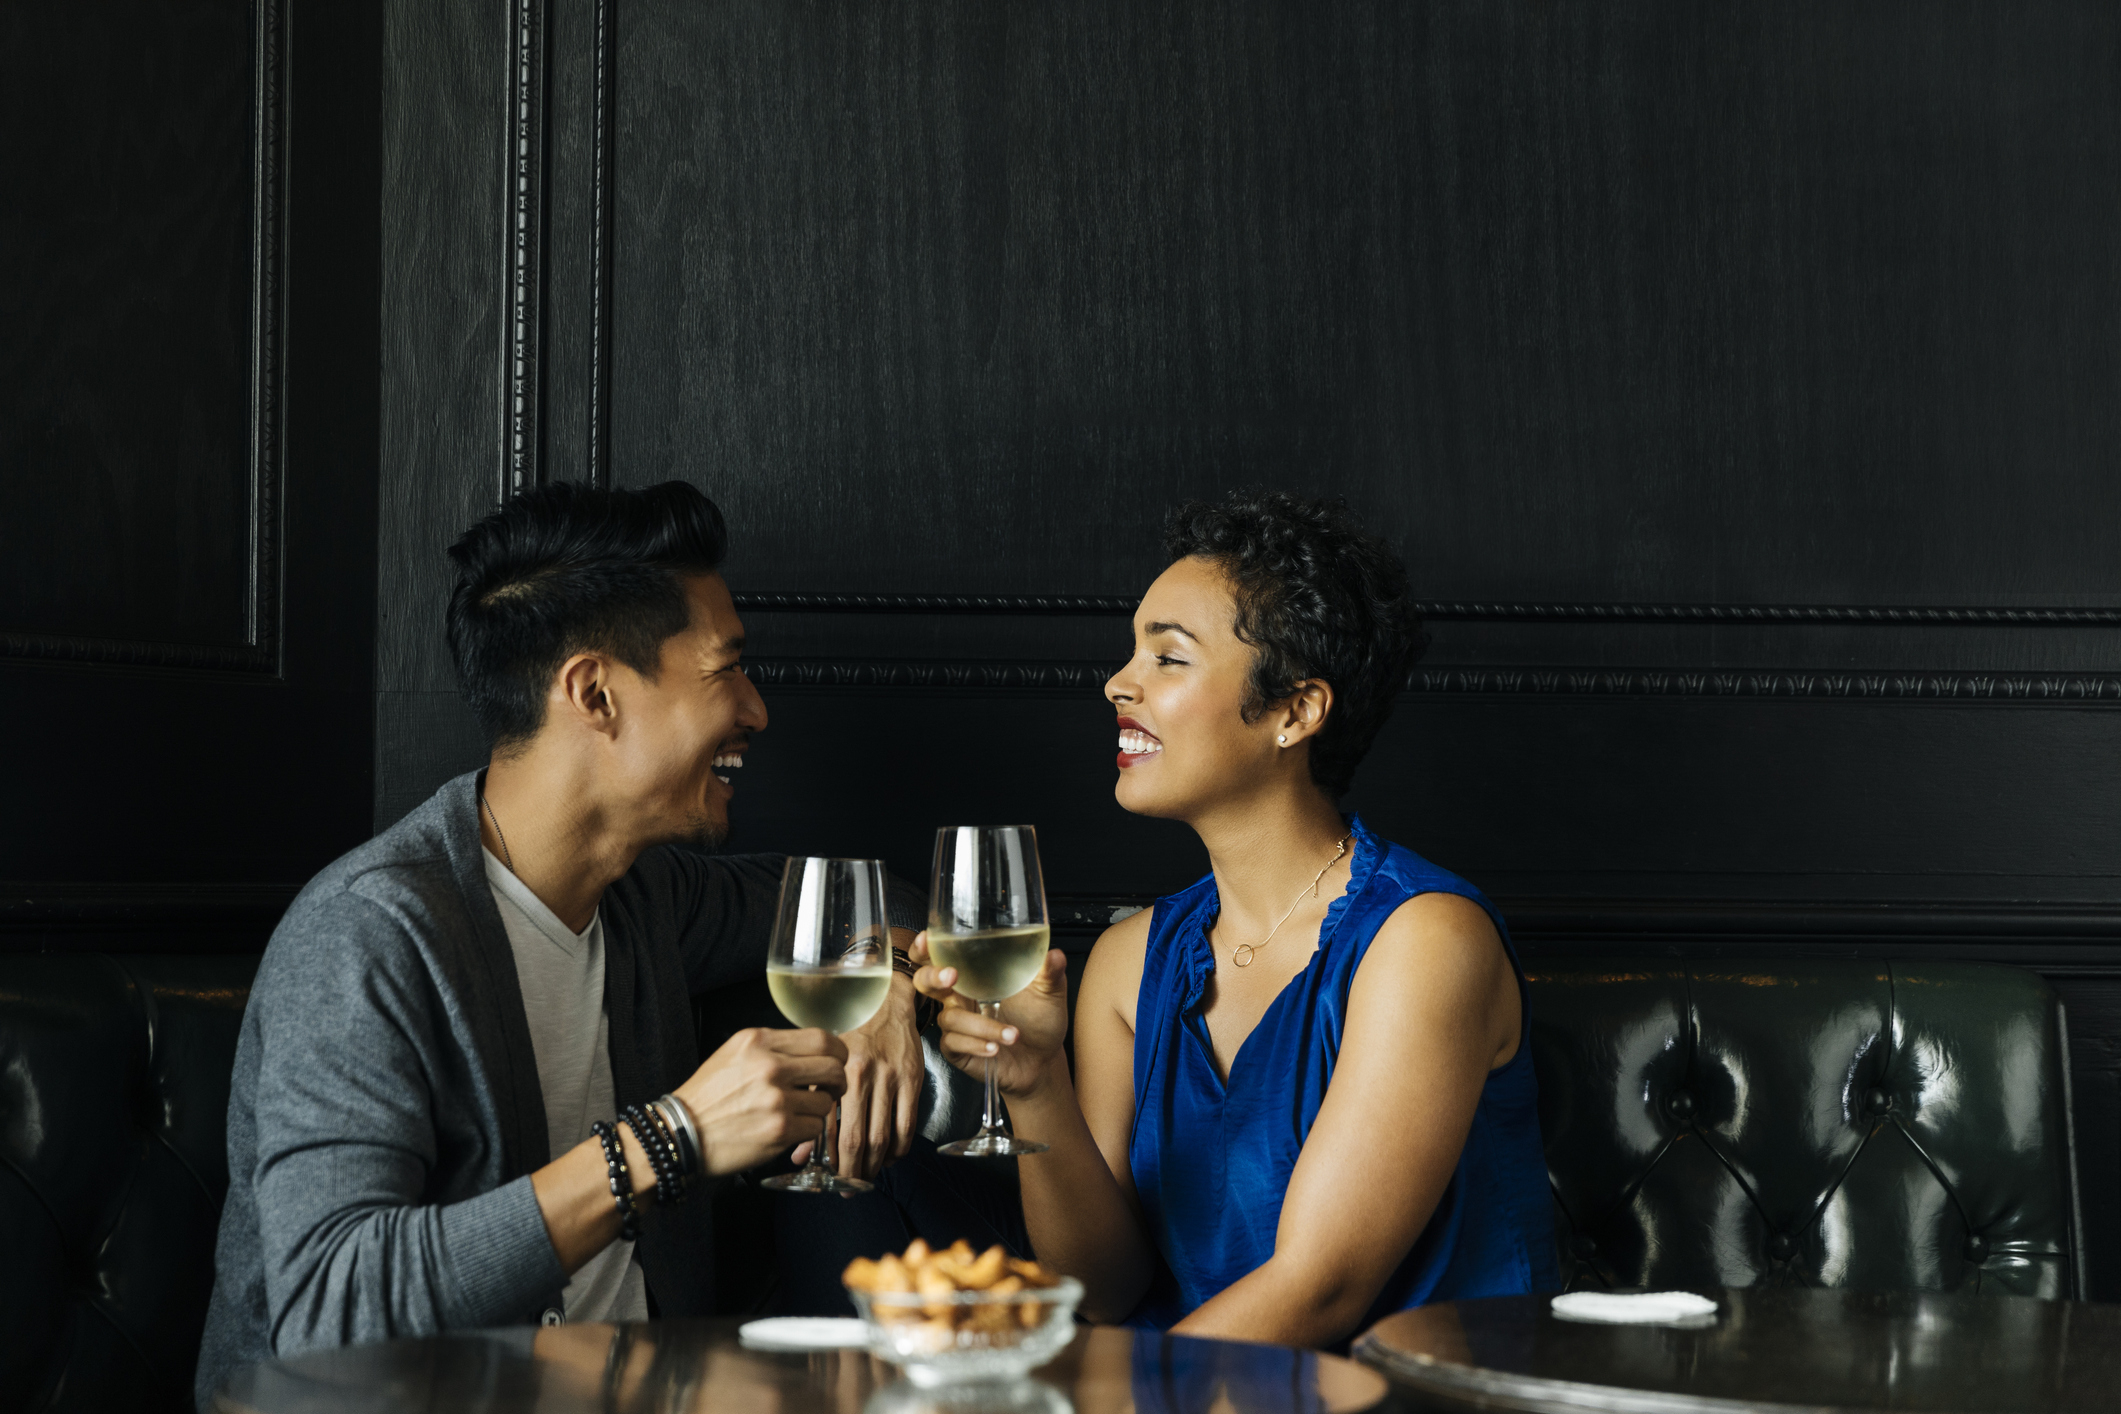 Two people smiling at each other while holding wine glasses in a dimly lit room